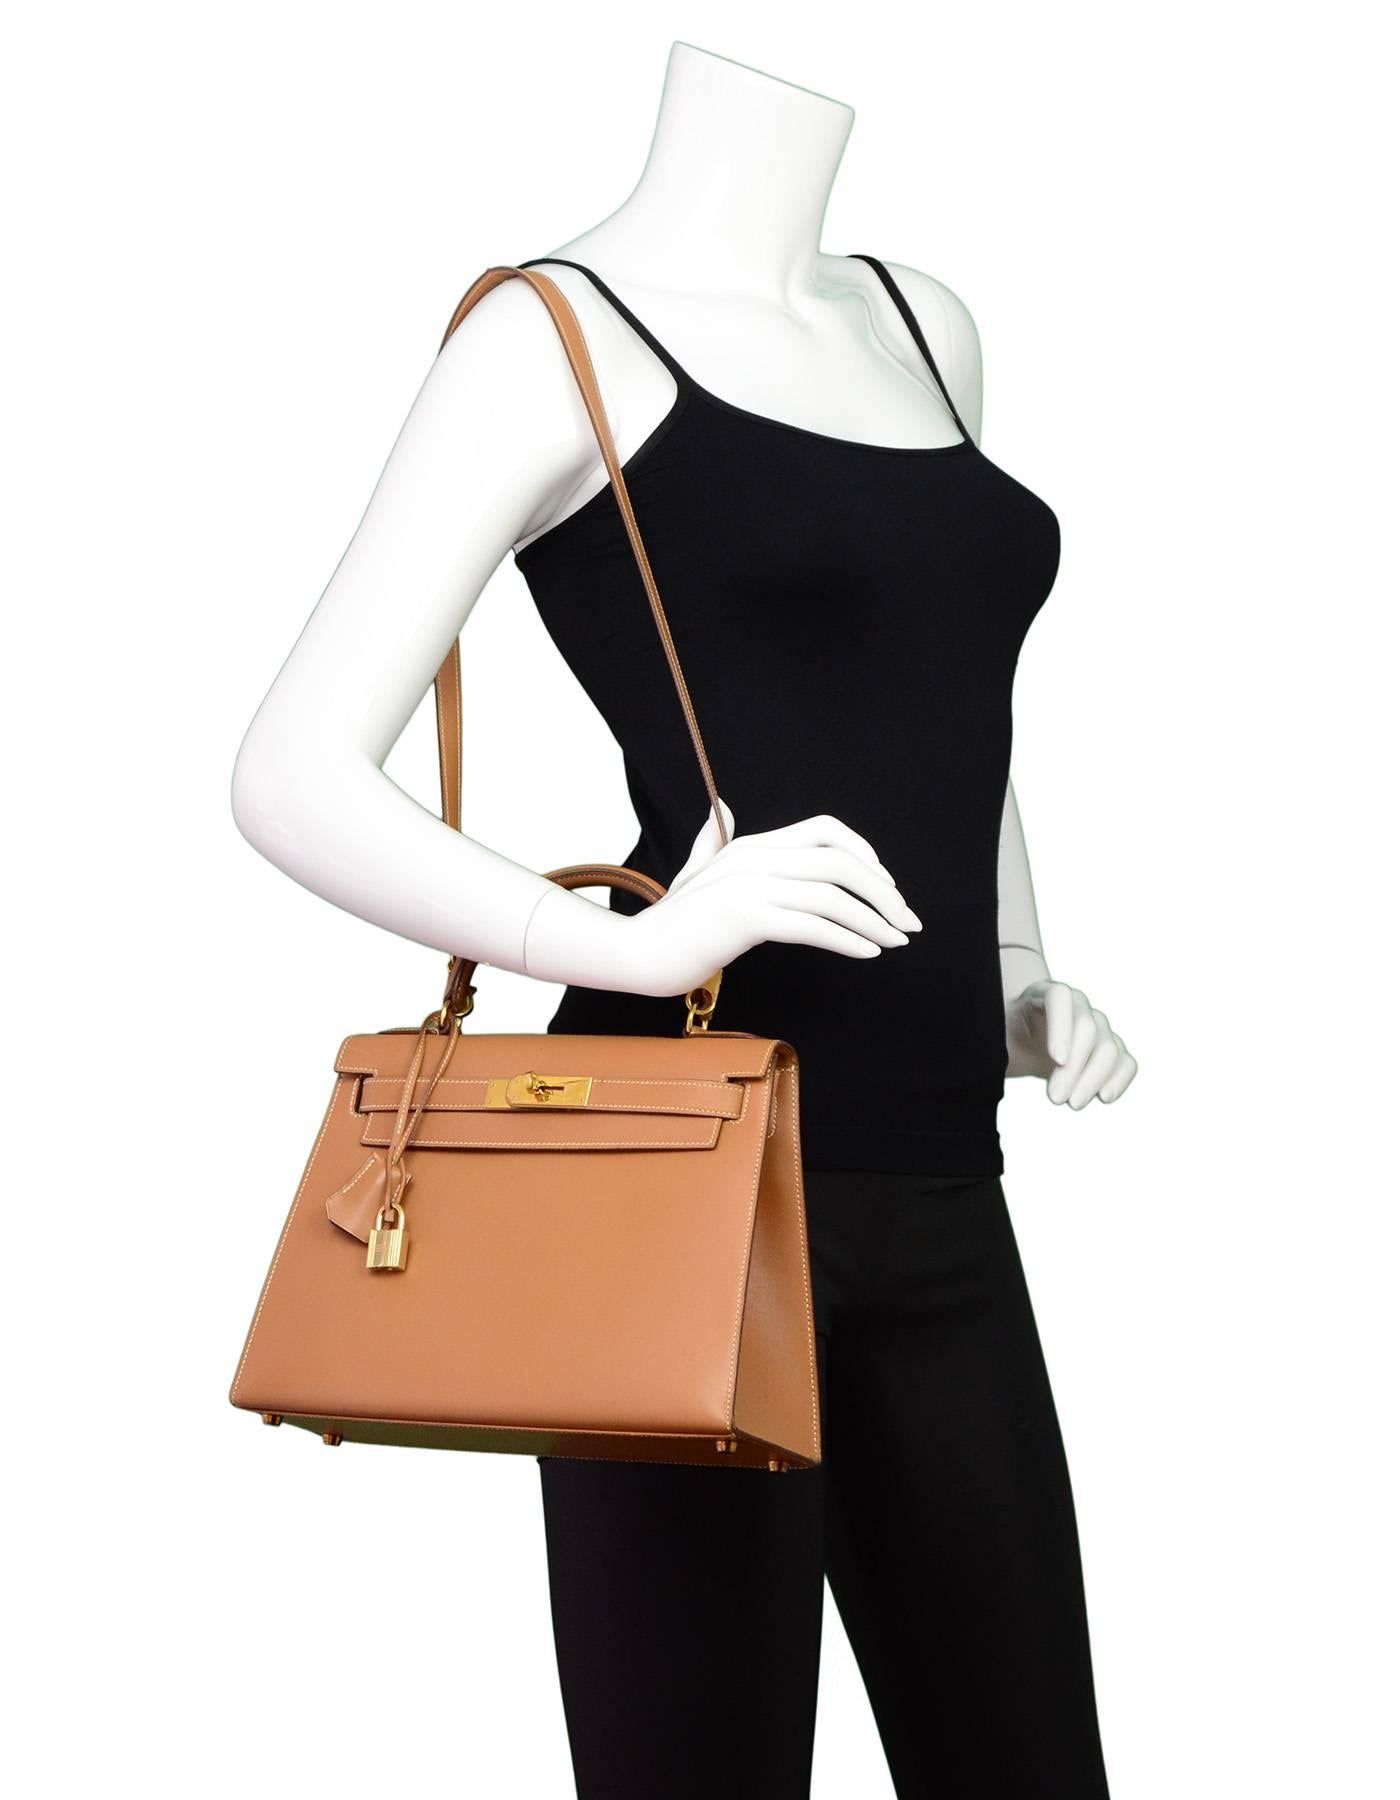 Hermes Tan Box 28cm Rigid Sellier Kelly Bag
Features removable shoulder/crossbody strap

Made In: France
Year of Production: 1992
Color: Tan
Hardware: Goldtone
Materials: Box leather, metal
Lining: Tan leather
Closure/opening: Flap top with two